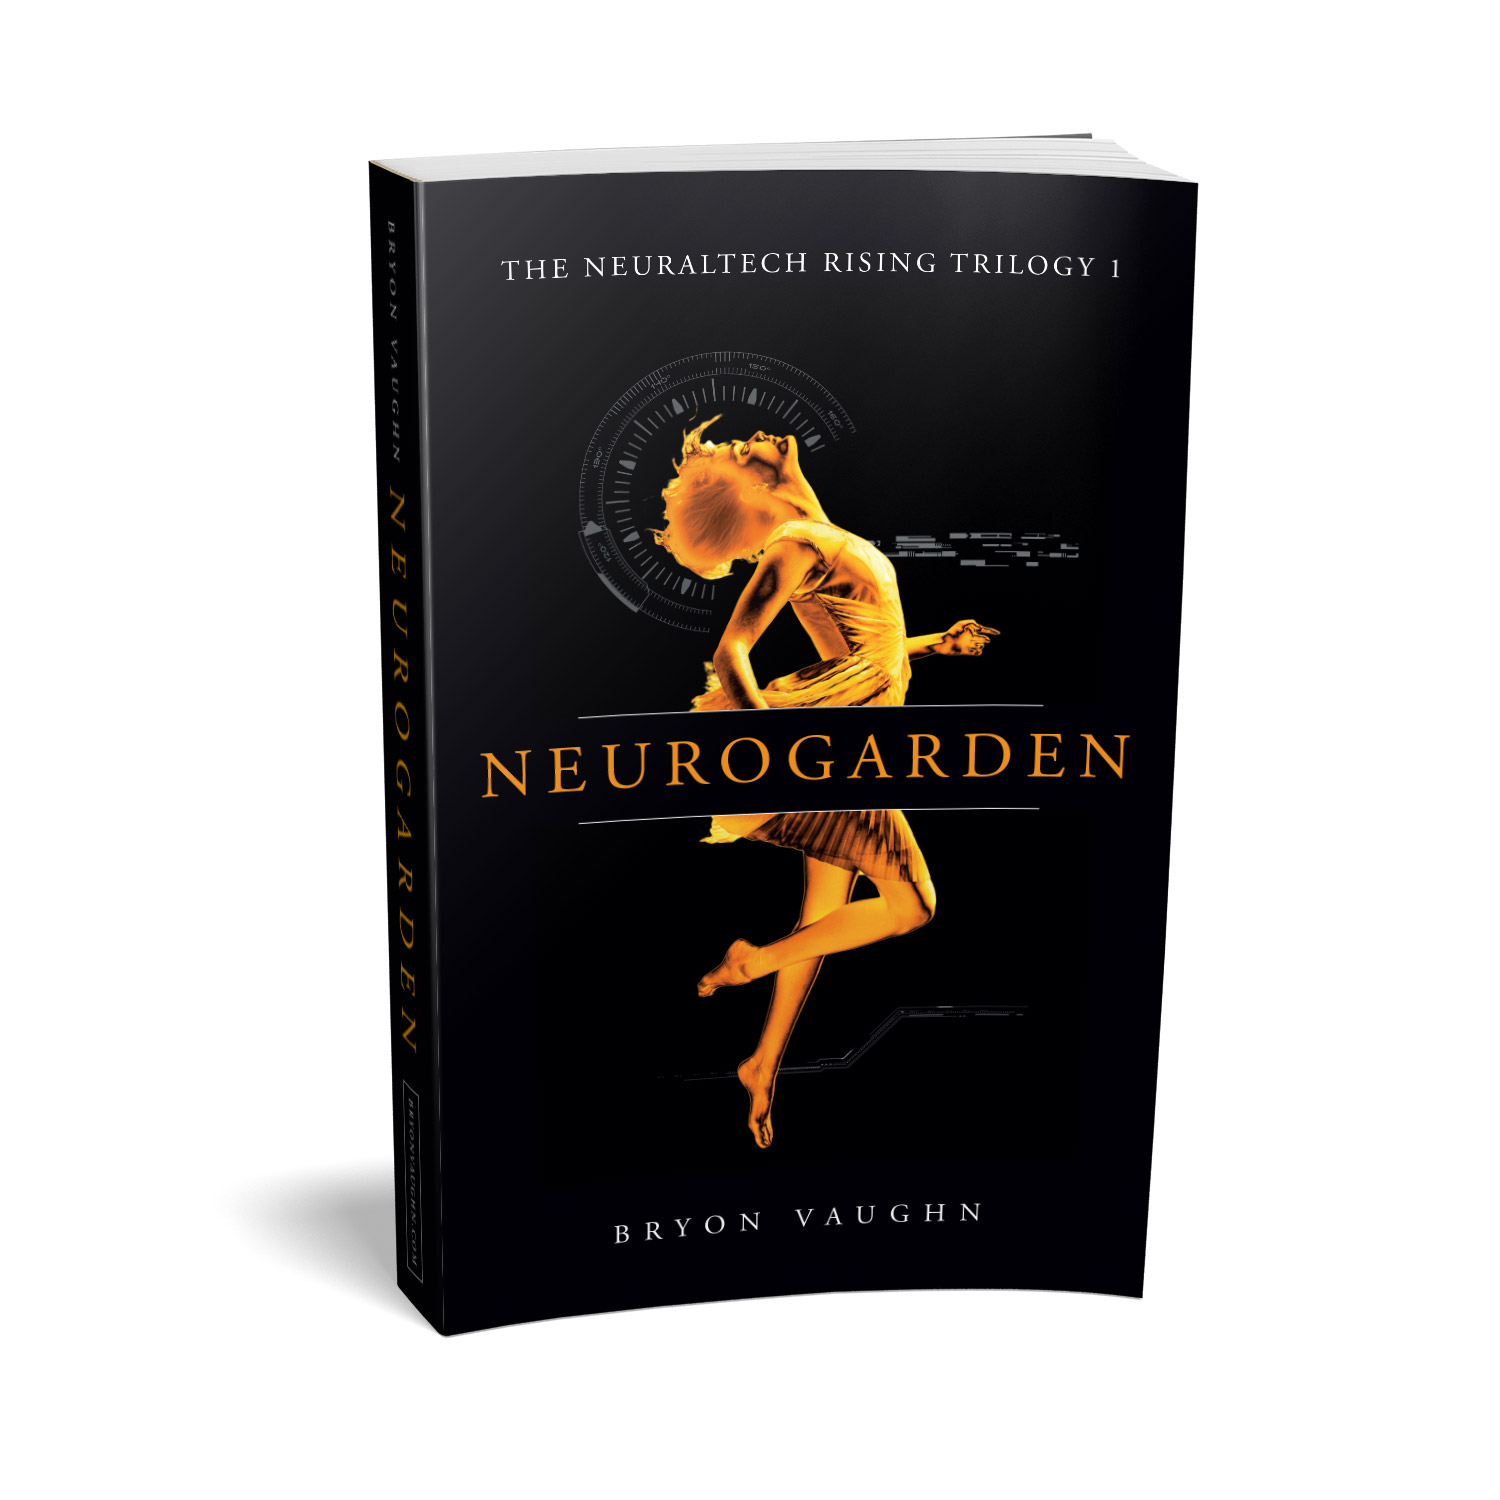 'Neurogarden' is a classy cyber thriller by author Bryon Vaughn. The book cover design is by Mark Thomas. To learn more about what Mark could do for your book, please visit coverness.com.